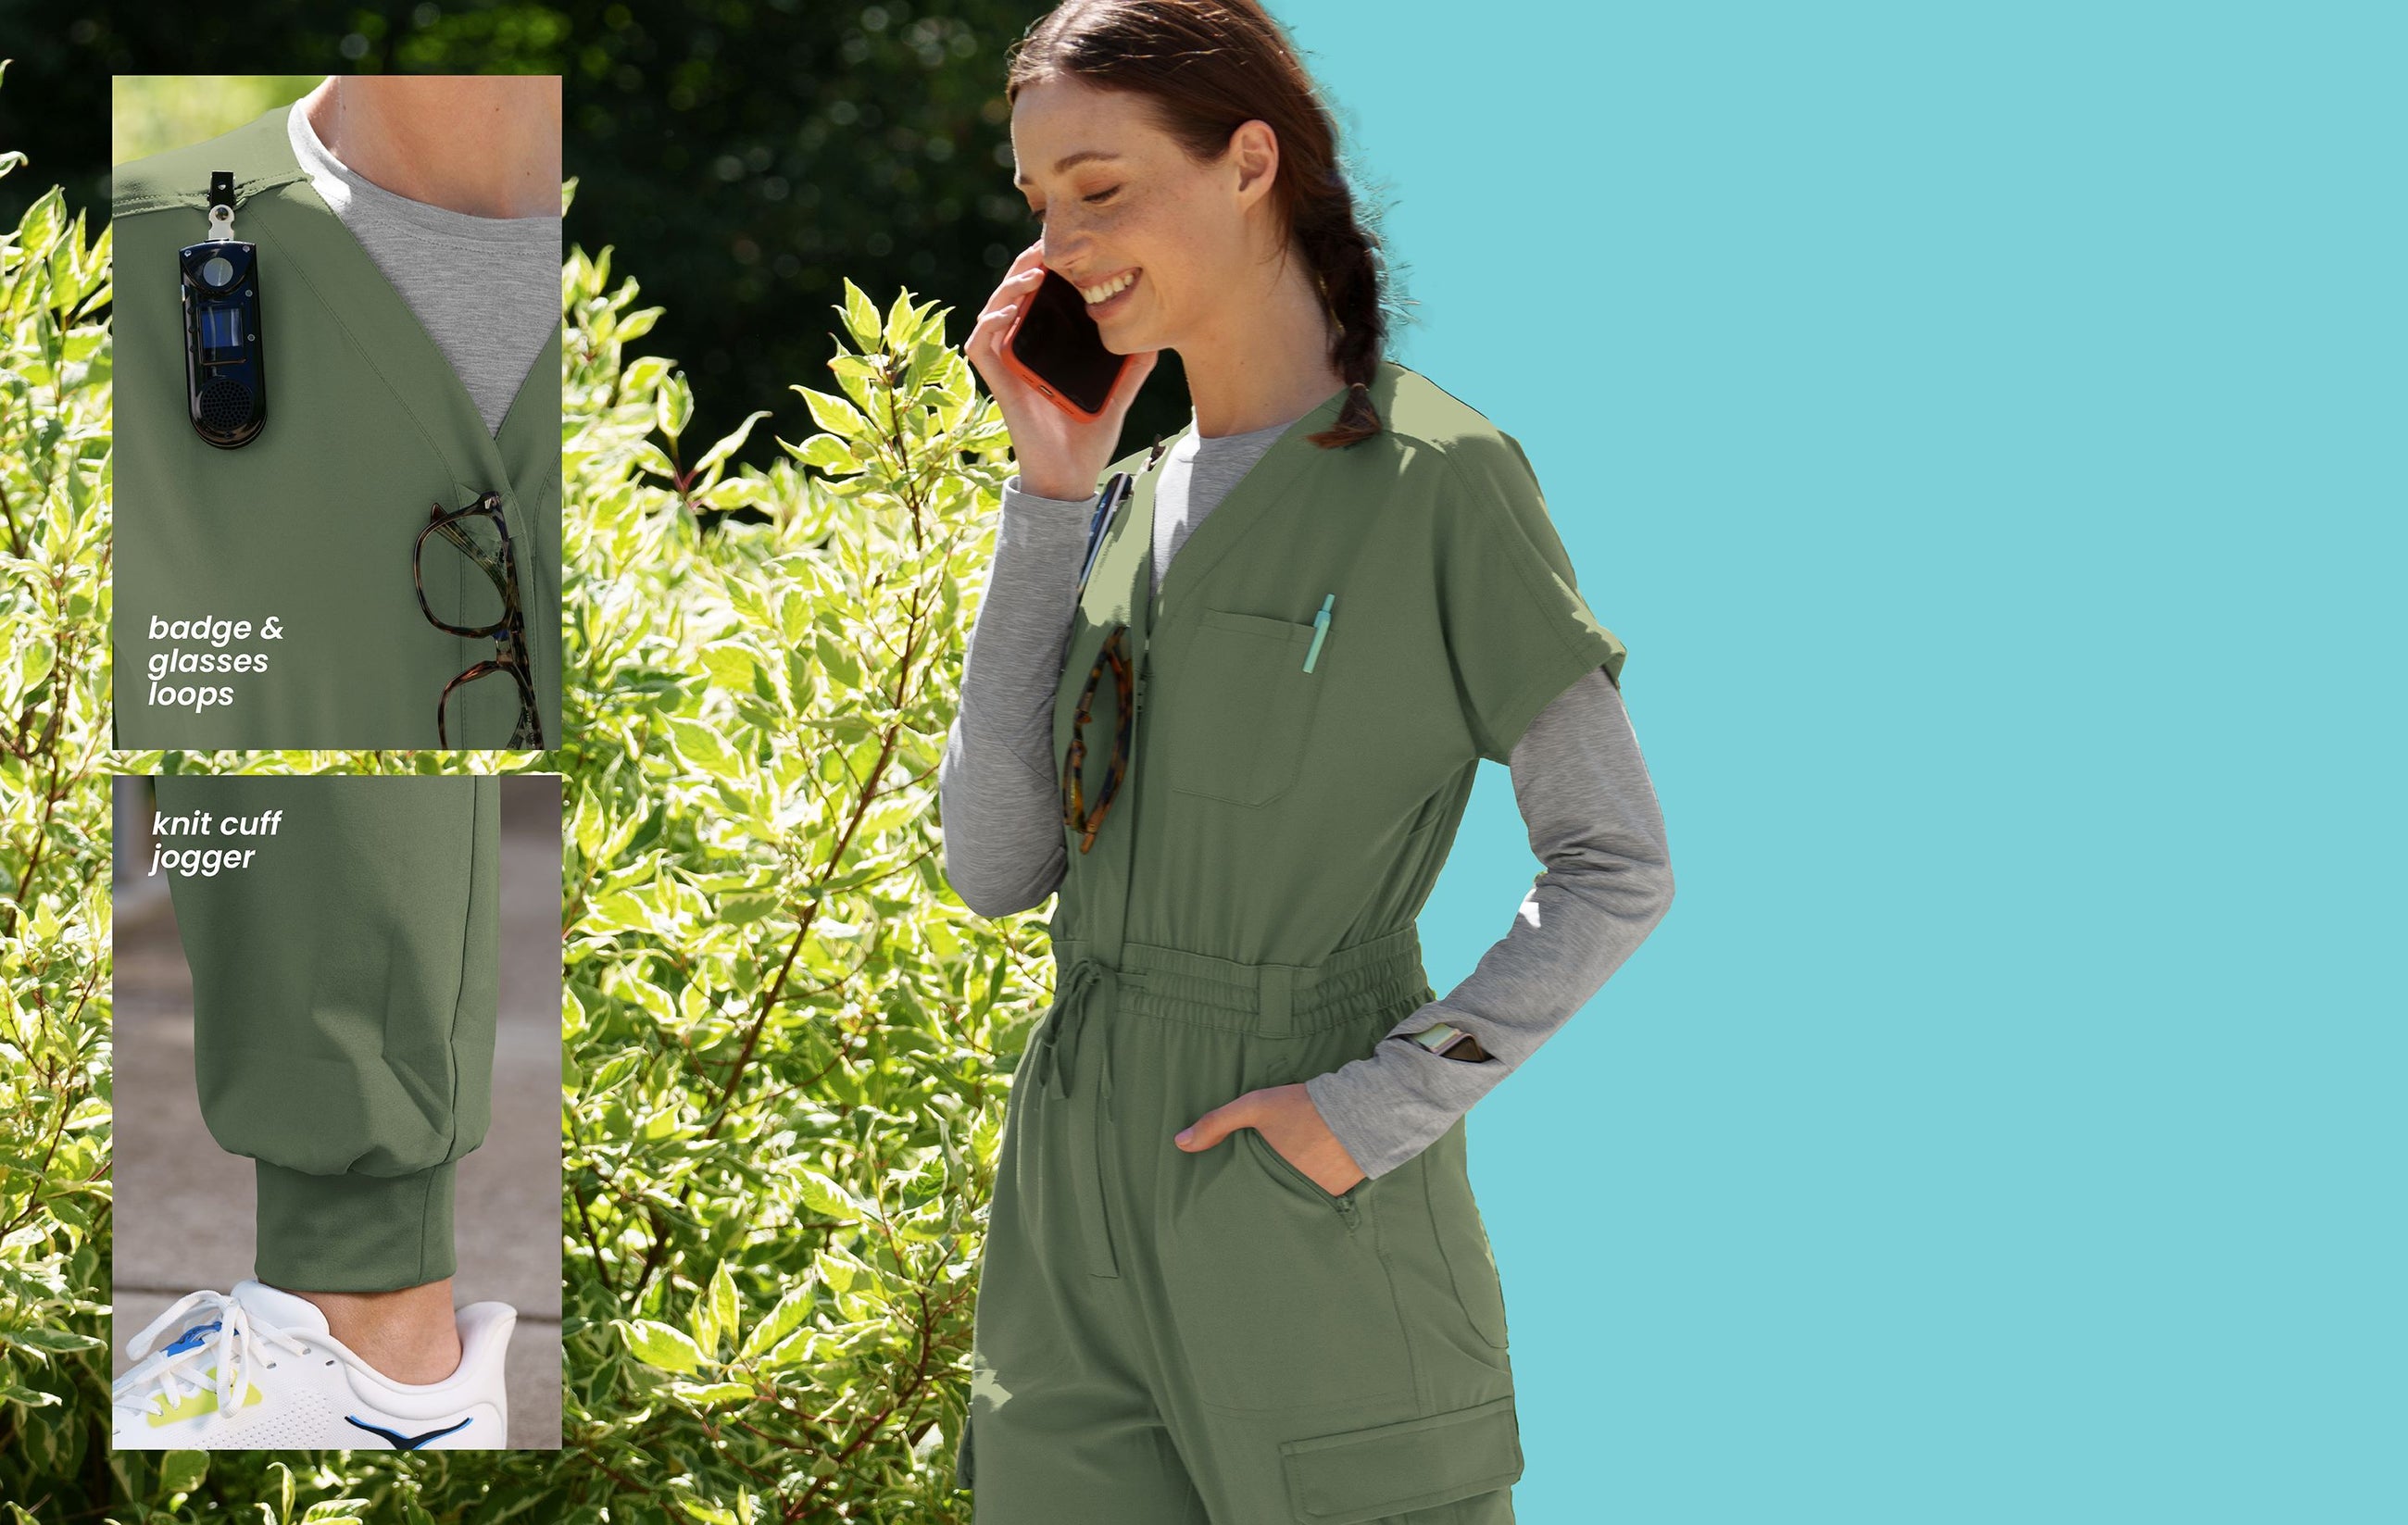 A woman wearing a scrub Jumpsuit walks next to bushes while talking on the phone. Small inset image shows close up with text “badge & glasses loop”. A second small inset image shows close up with text “knit cuff jogger”